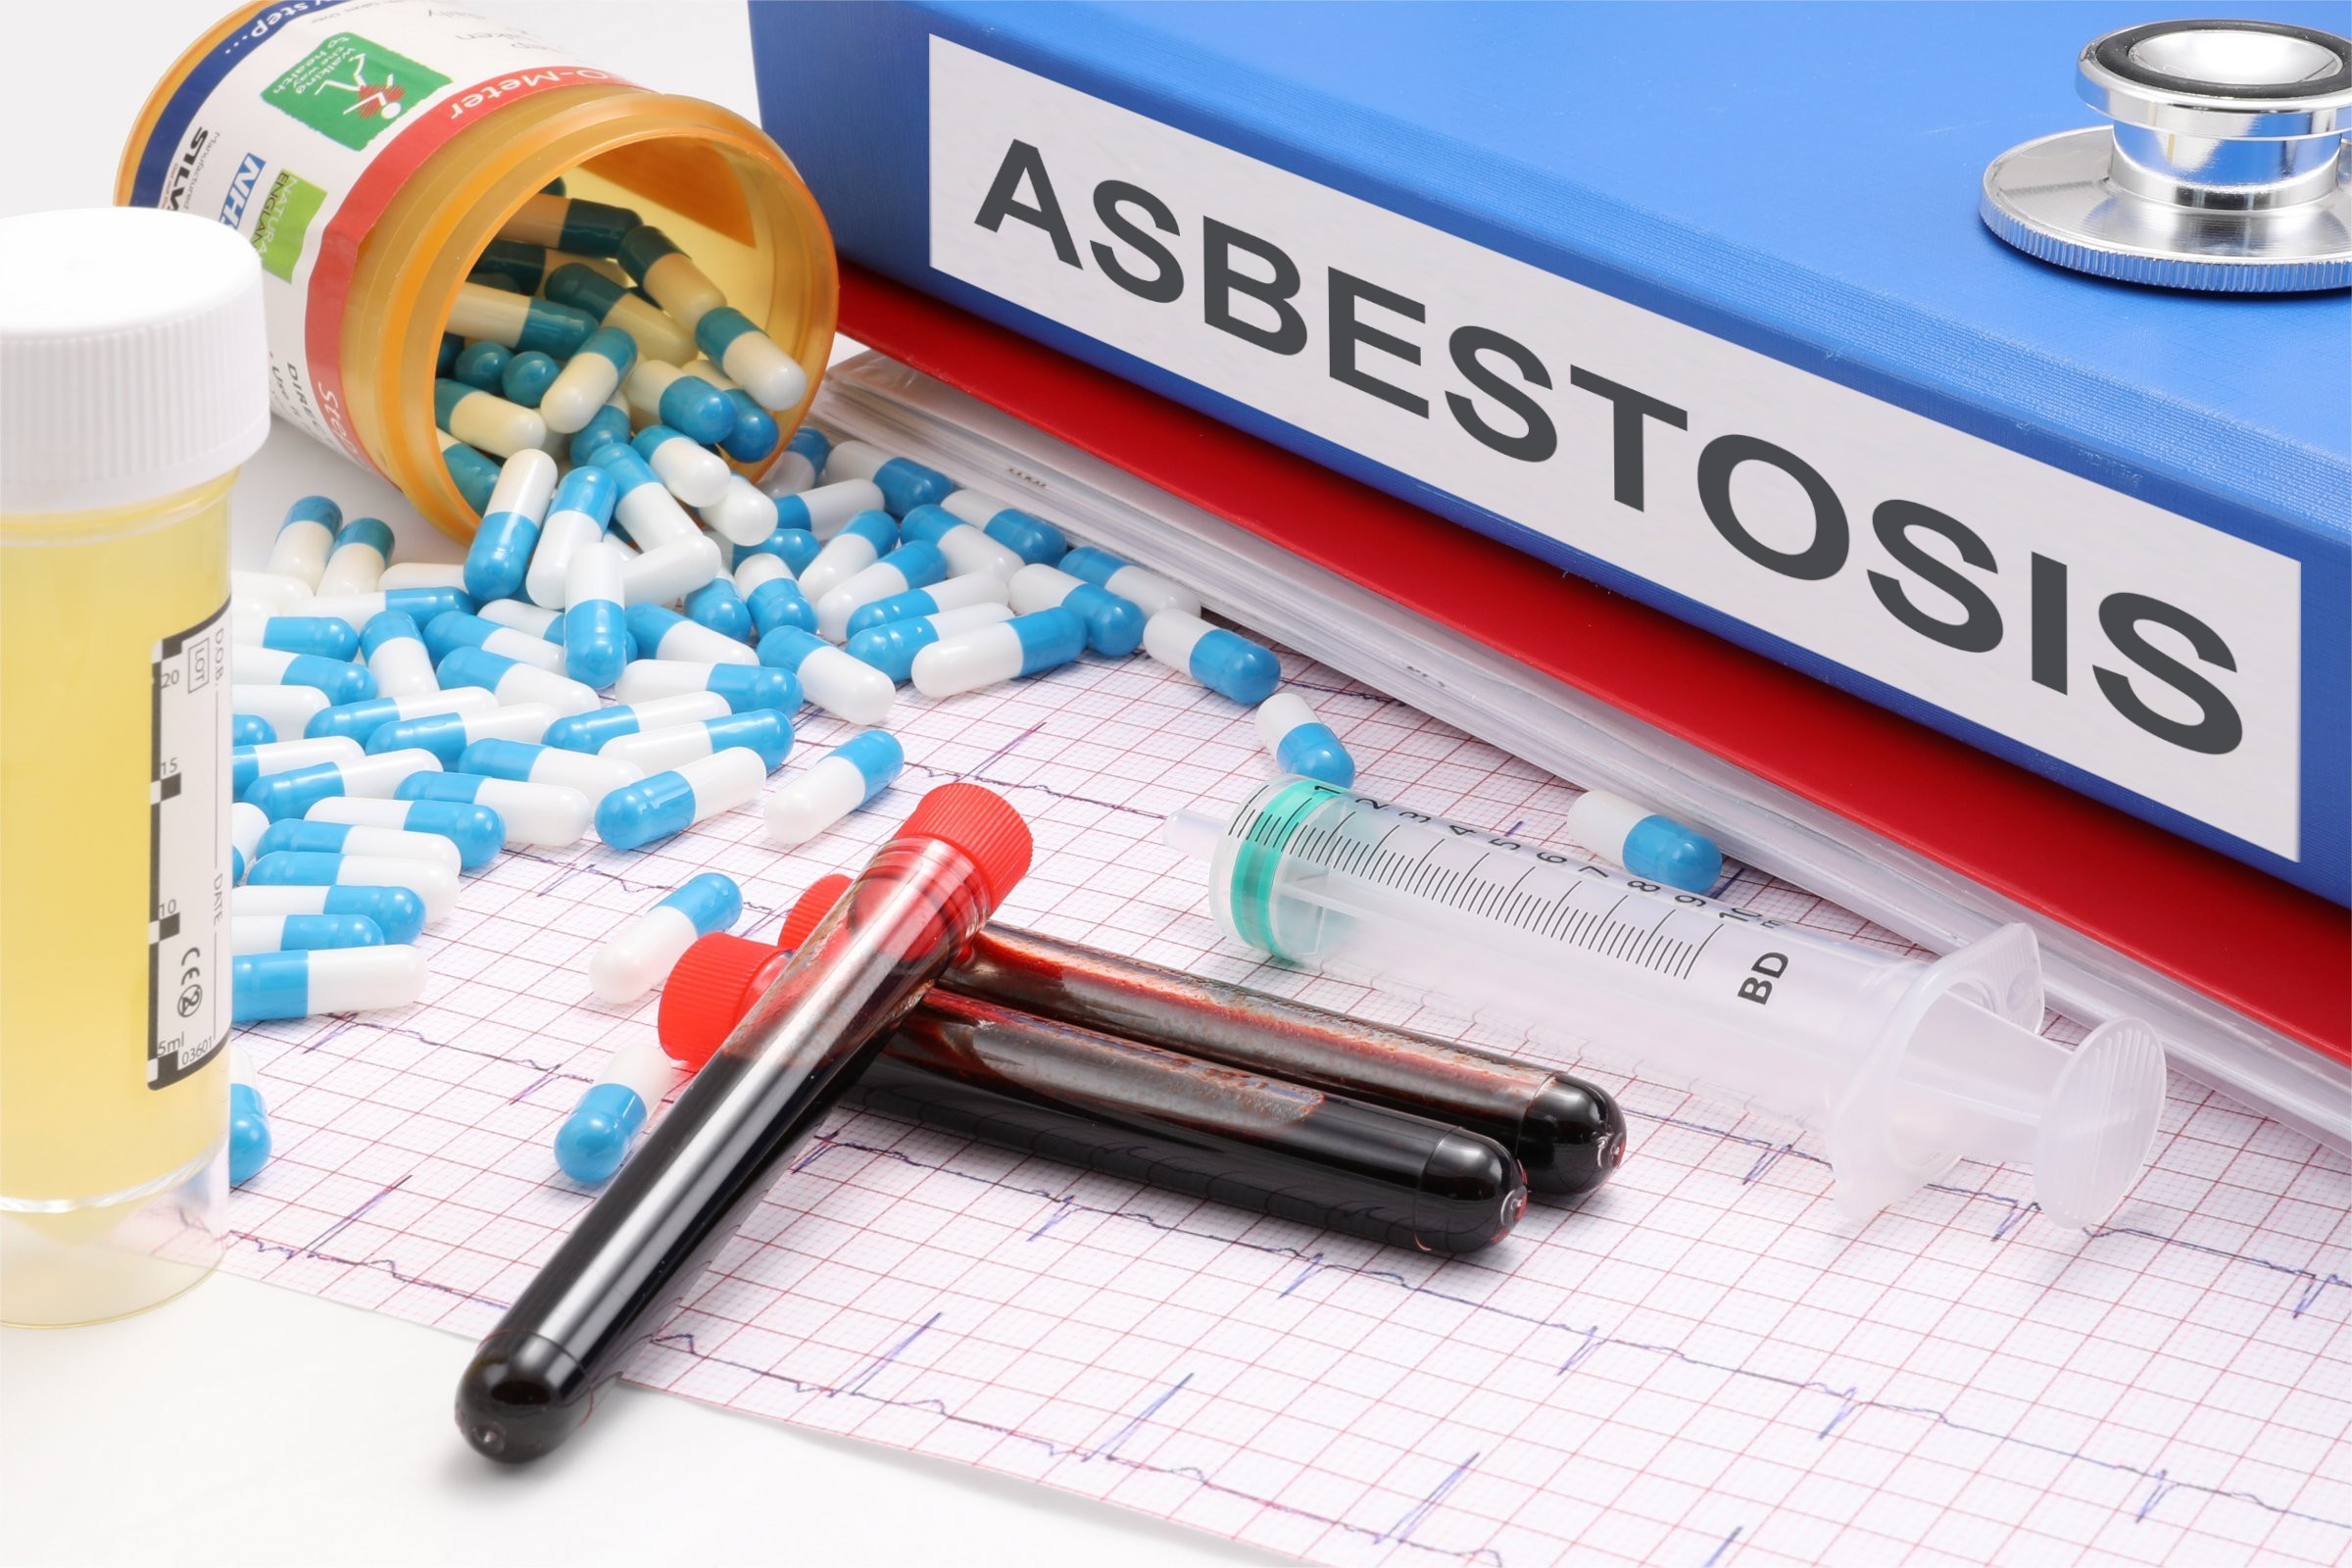 Difference Between Asbestosis and Chronic Obstructive Pulmonary Disease (COPD)